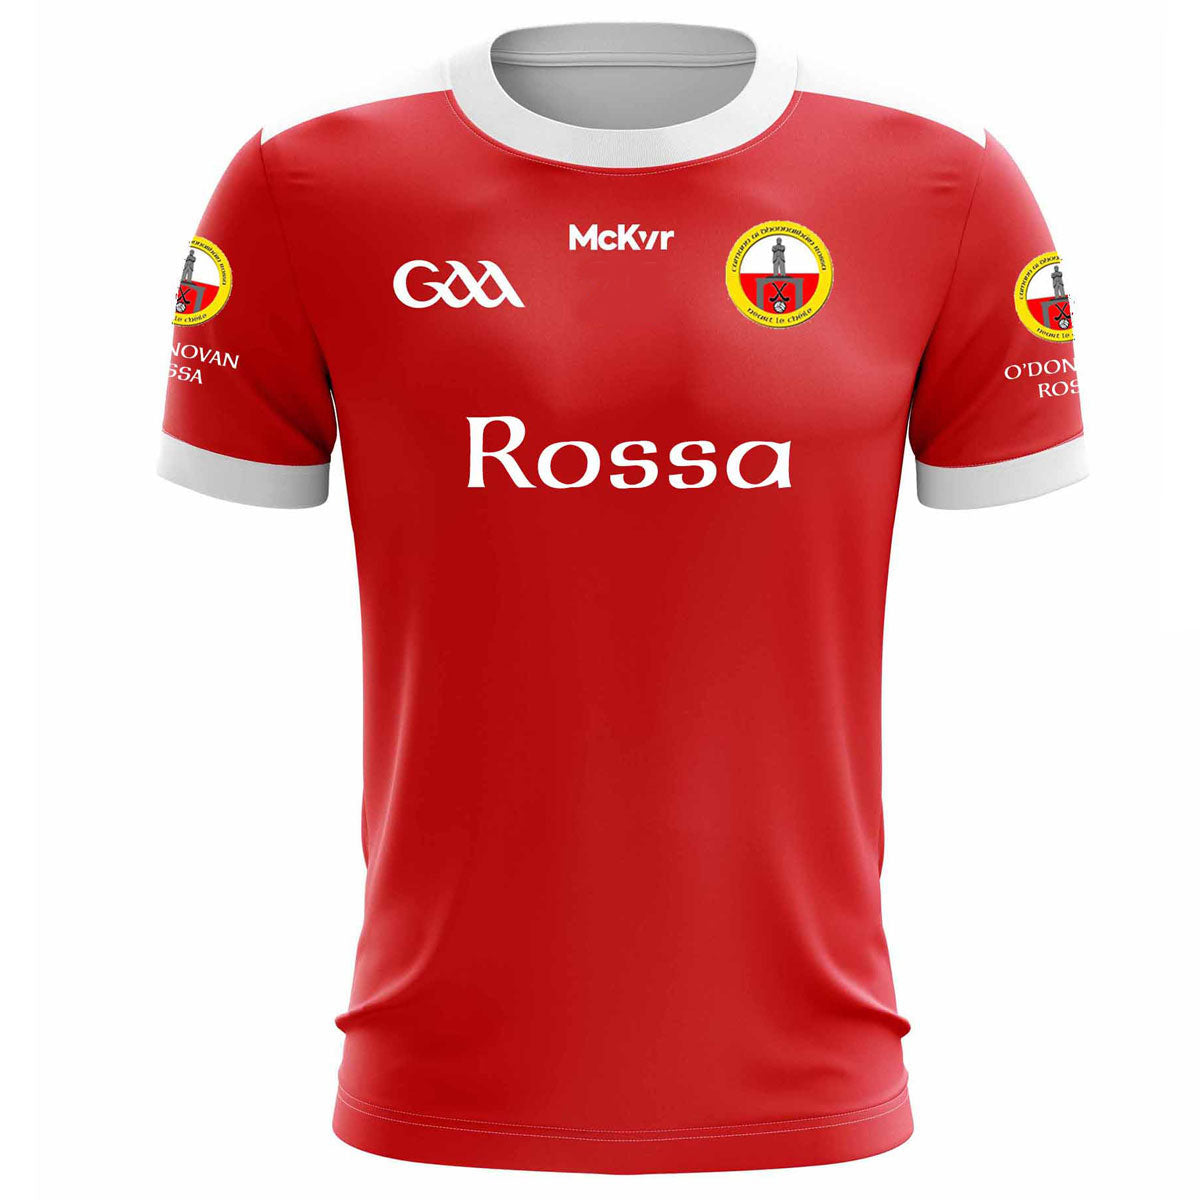 Mc Keever O'Donovan Rossa GAA Playing Jersey - Adult - Red/White Player Fit